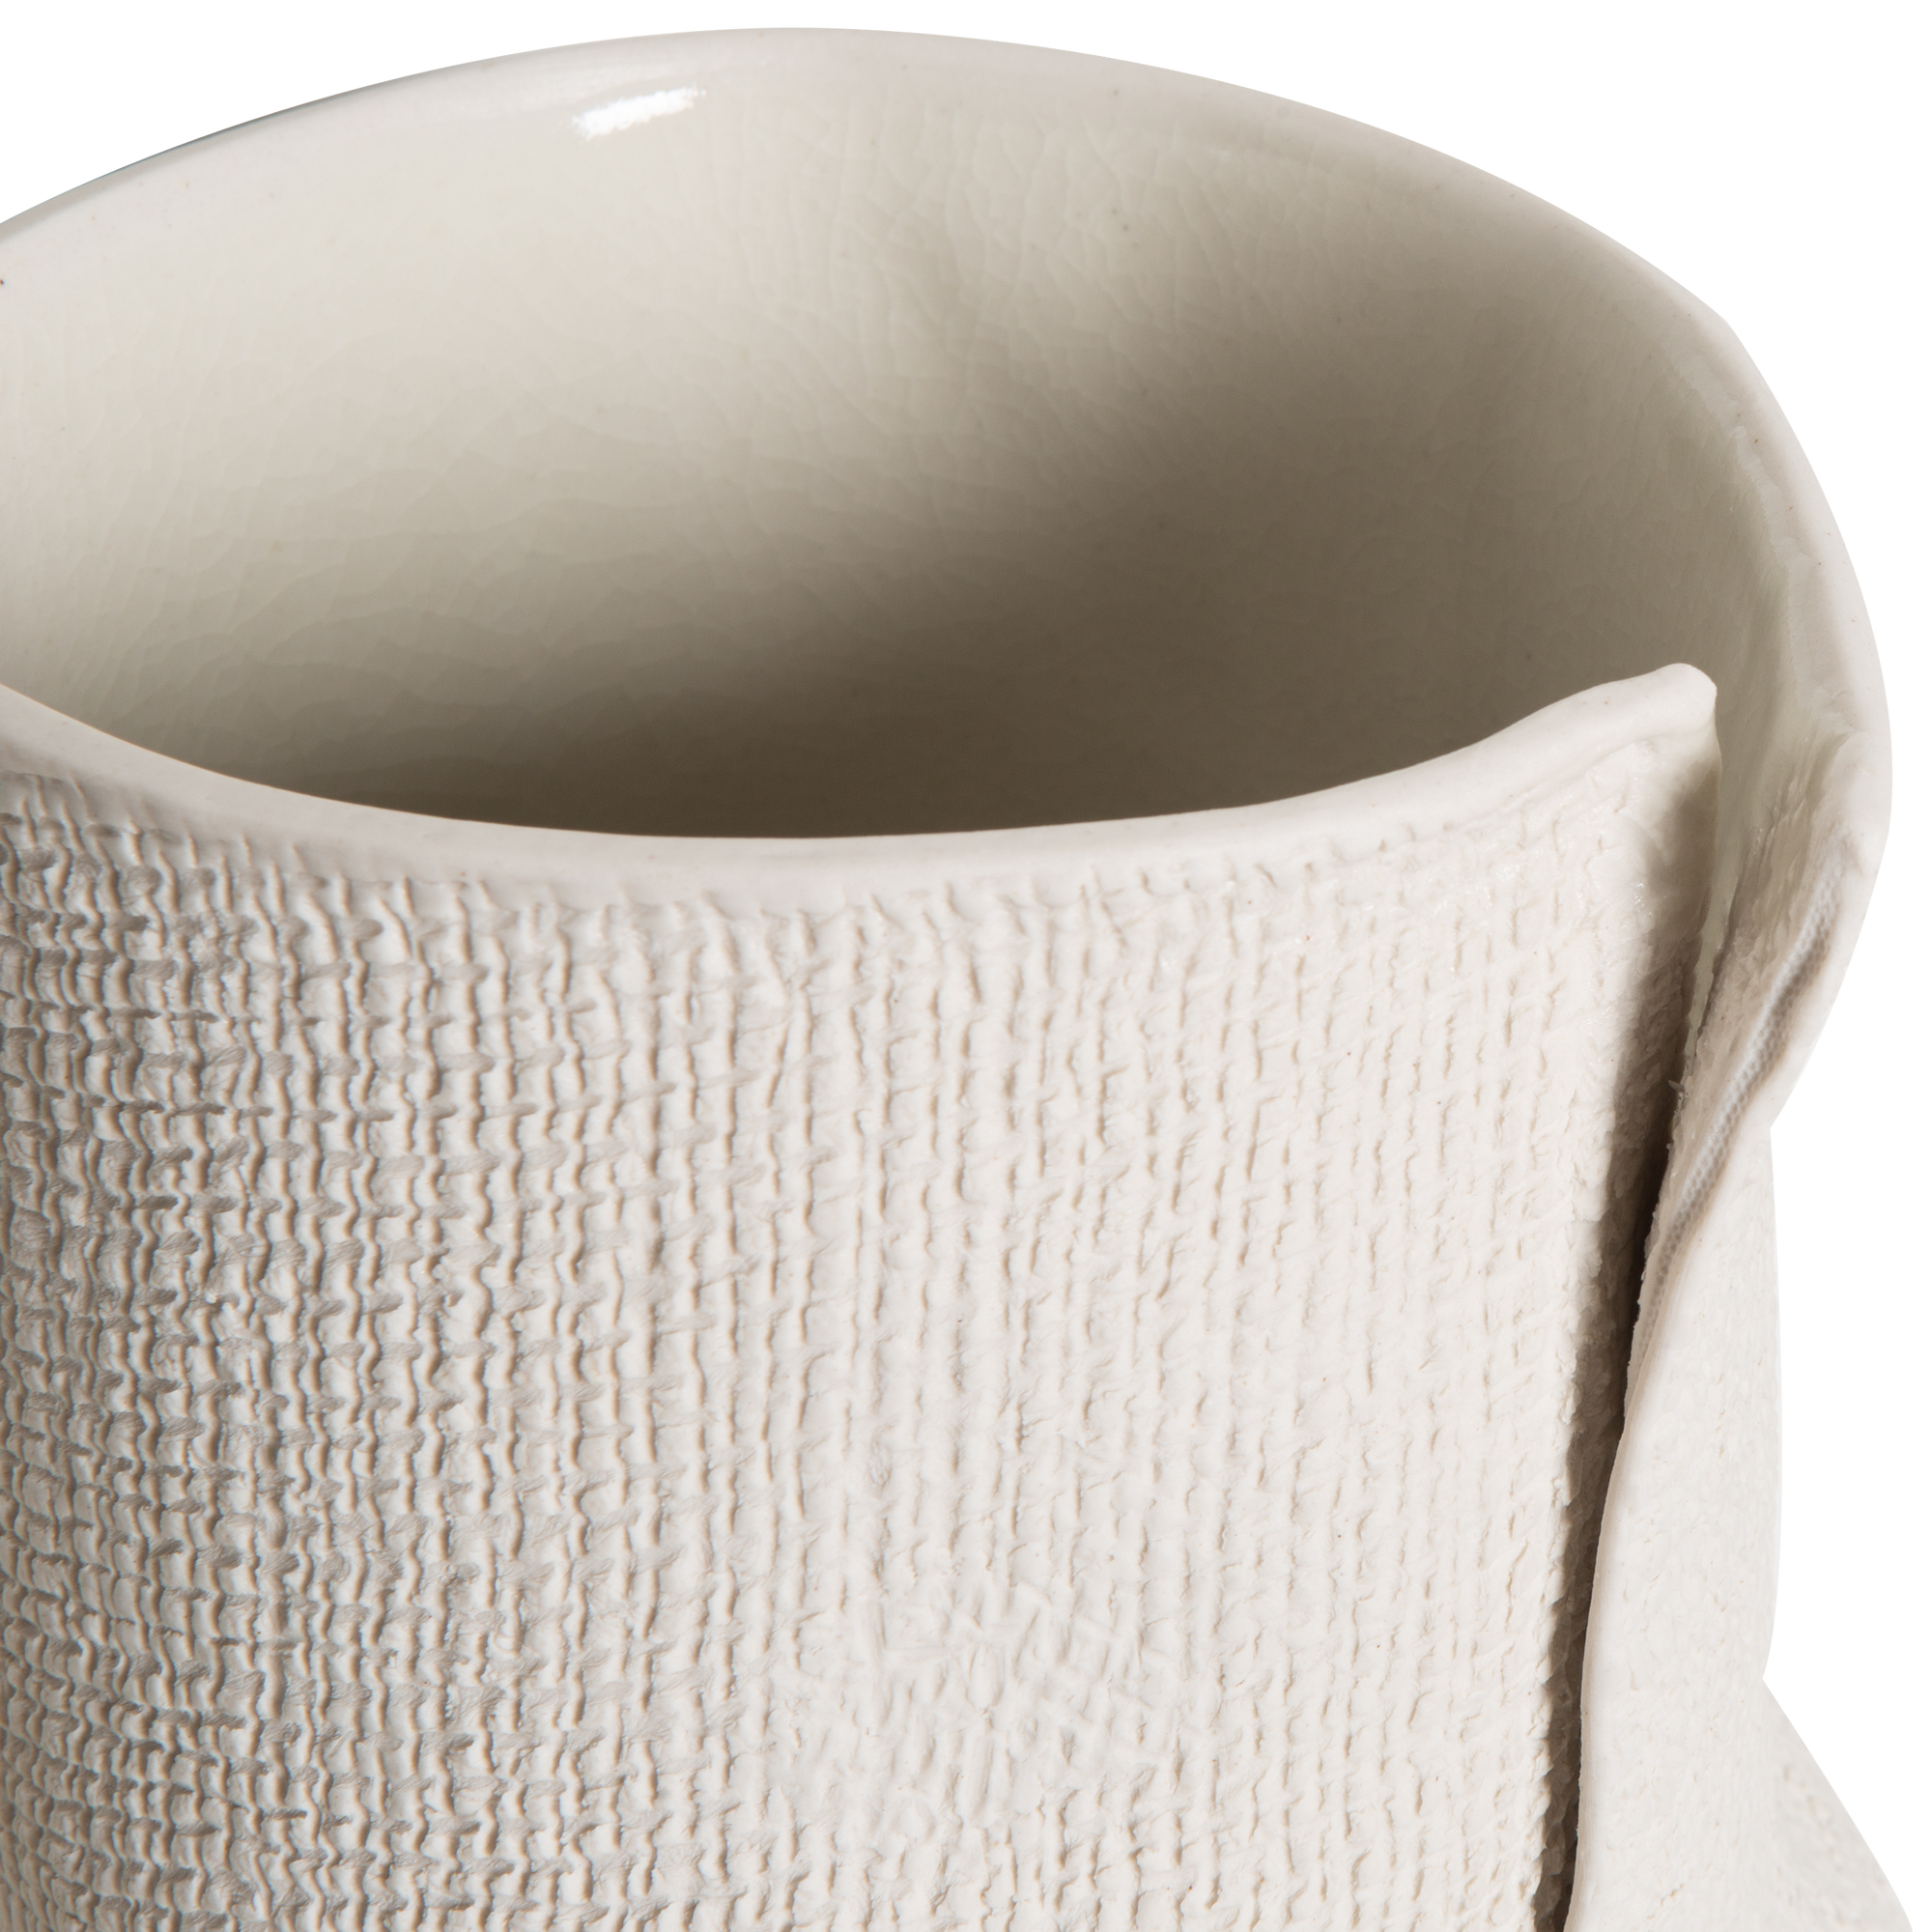 Embracing the beauty of imperfection, the Burlap Bottle Vase is uniquely textured and this intentionally imperfect vase was handcrafted using vitreous high-fire, pure porcelain.